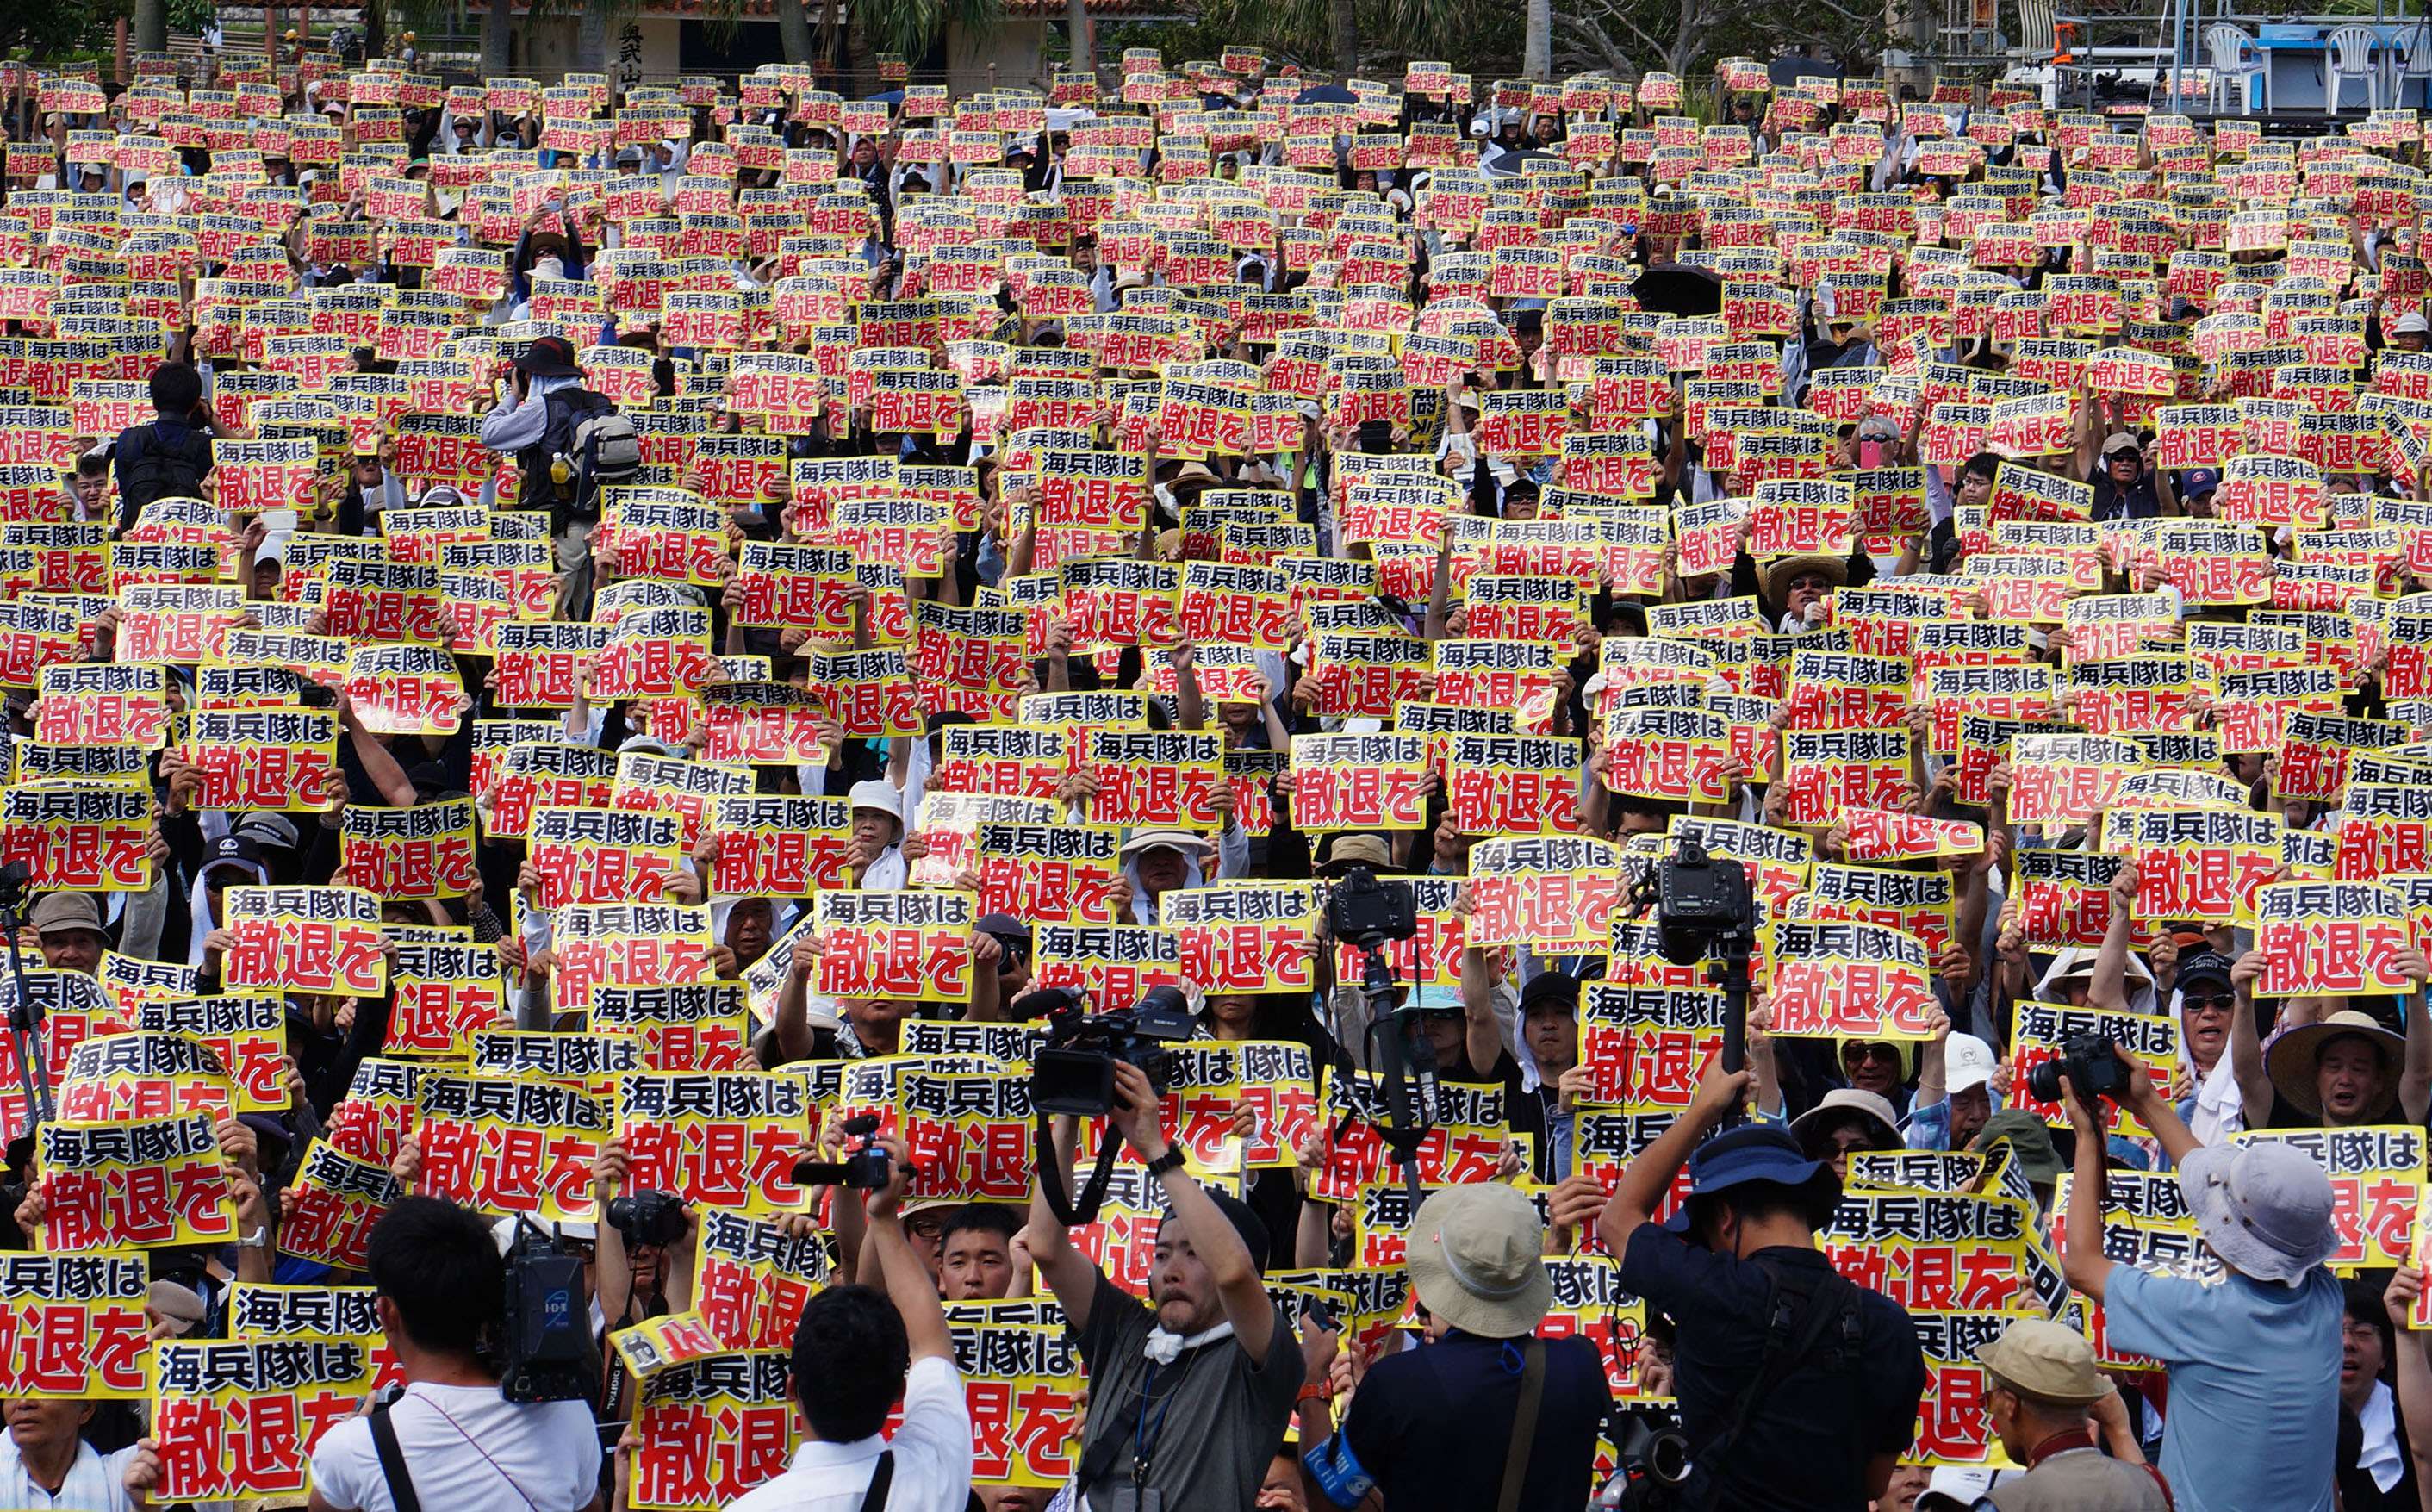 Protesters in Naha, Okinawa, rally last month against the US military presence in Okinawa, as they have done since 1995. Photo: Xinhua